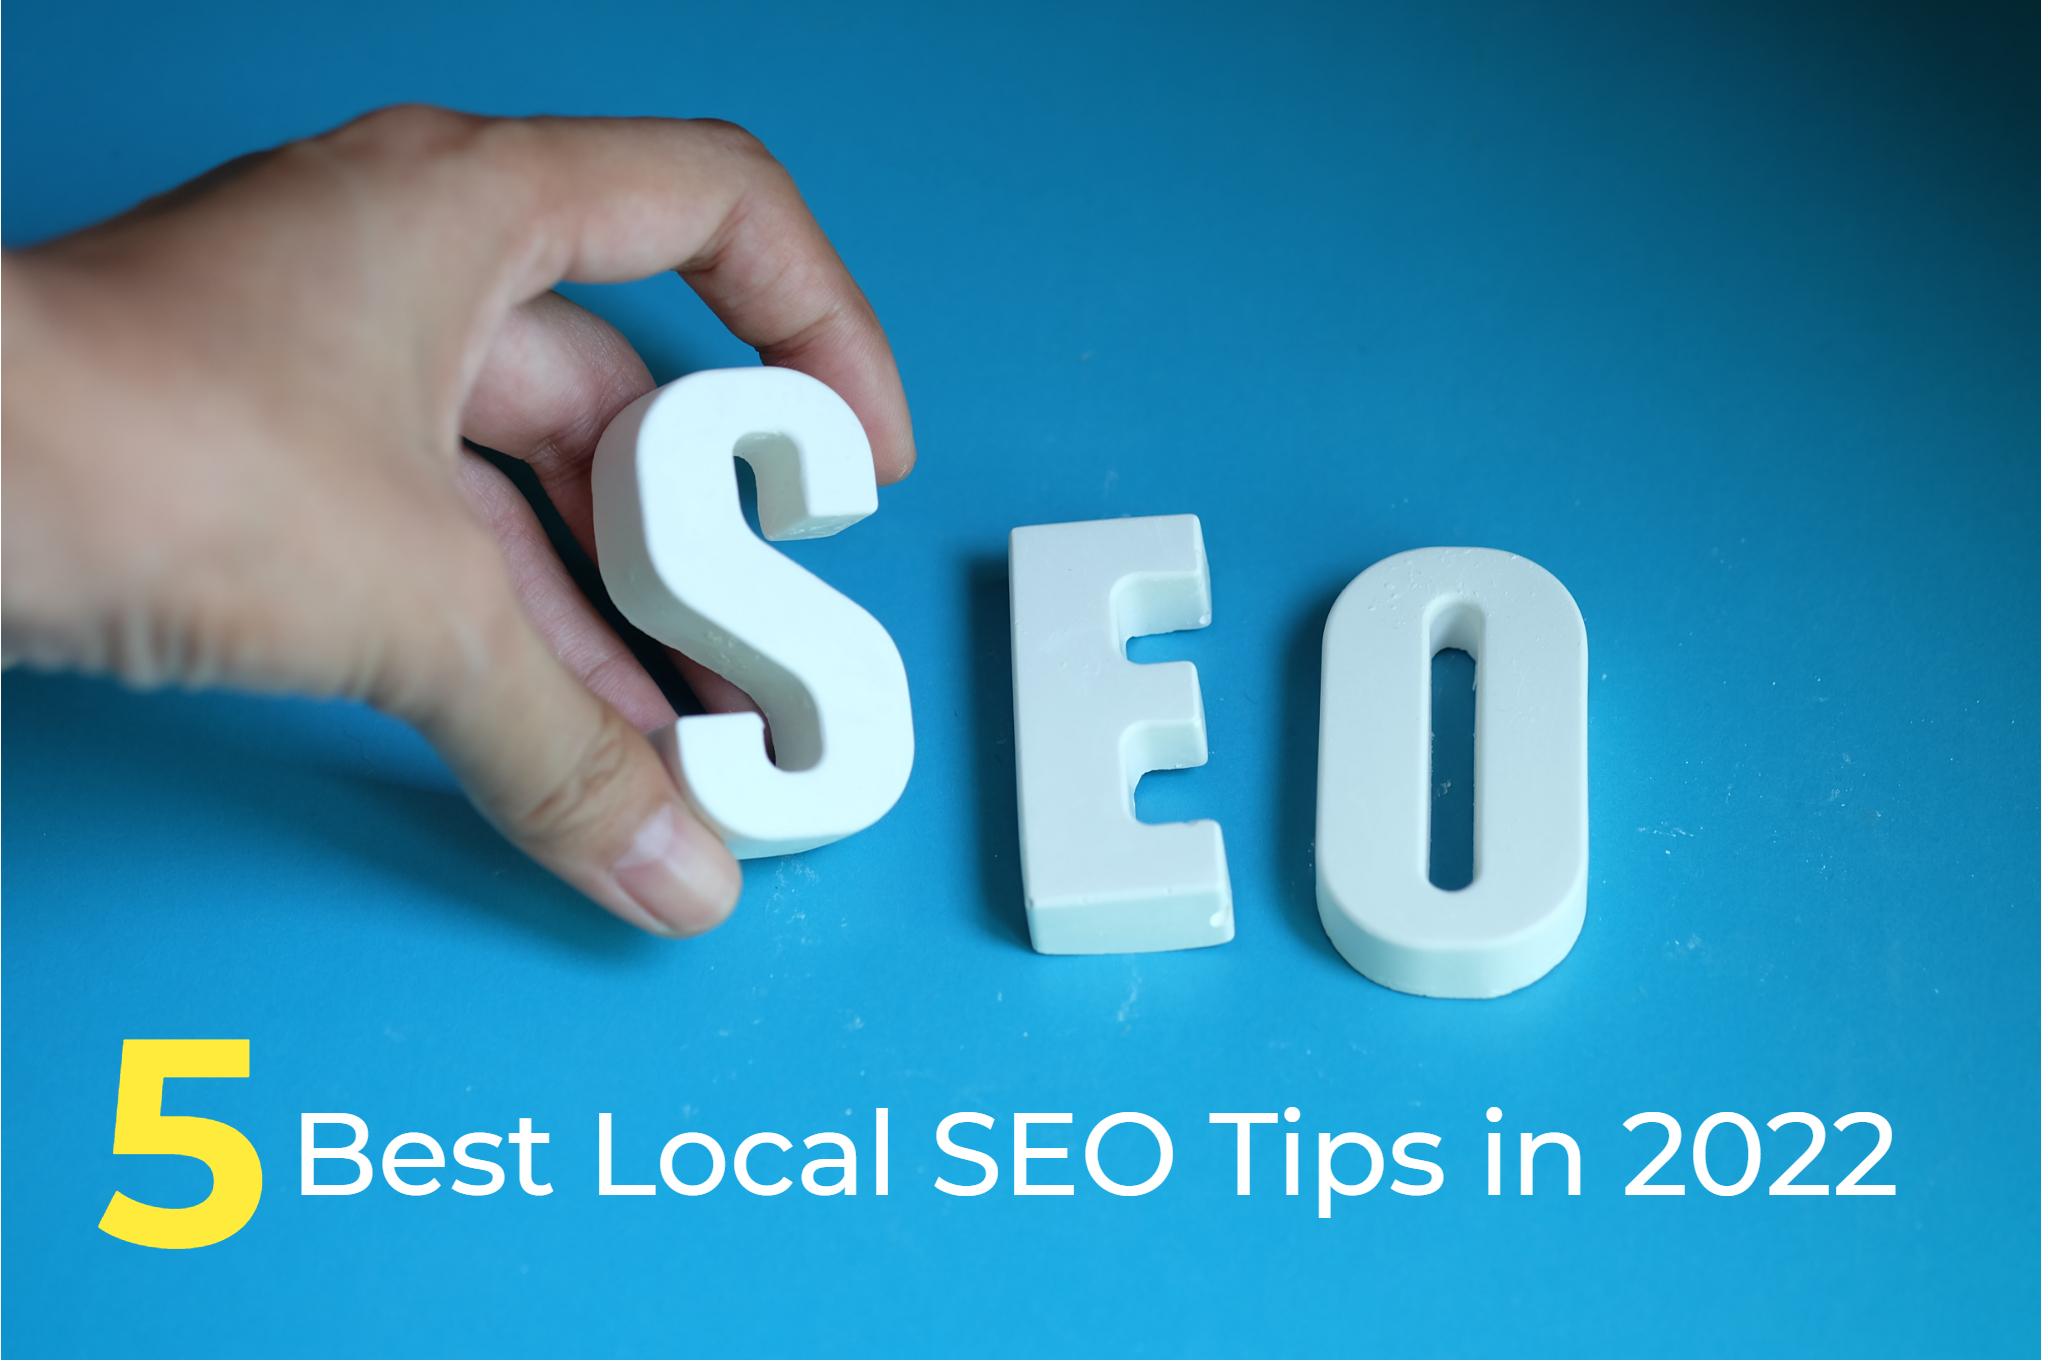 5 Most Effective Local SEO Tips in 2022